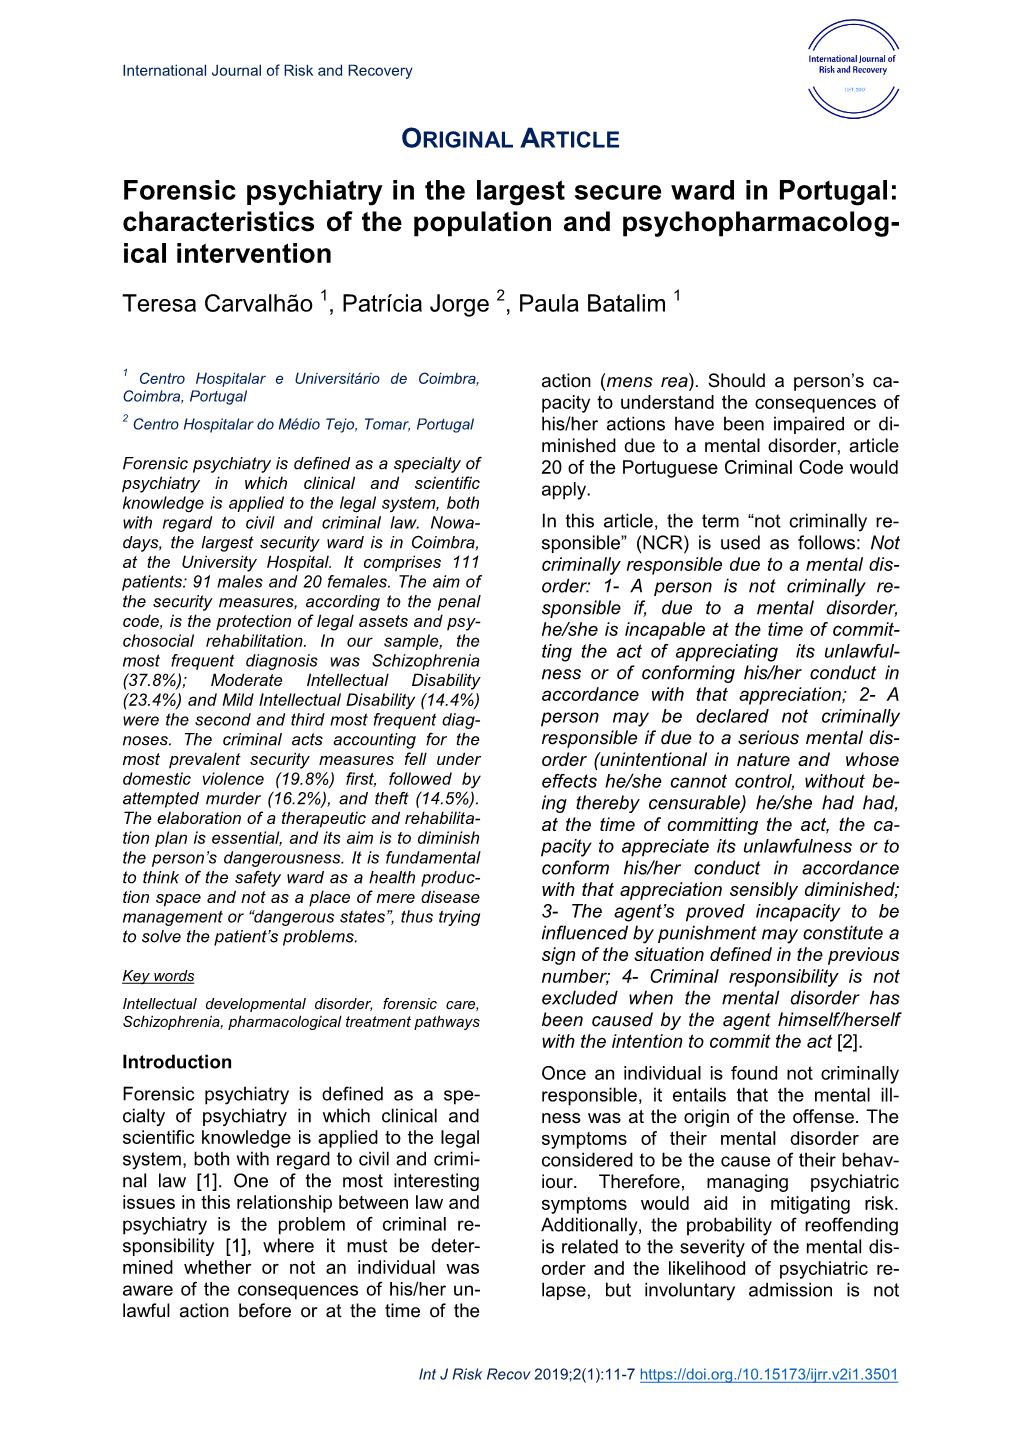 Forensic Psychiatry in the Largest Secure Ward in Portugal: Characteristics of the Population and Psychopharmacolog- Ical Intervention